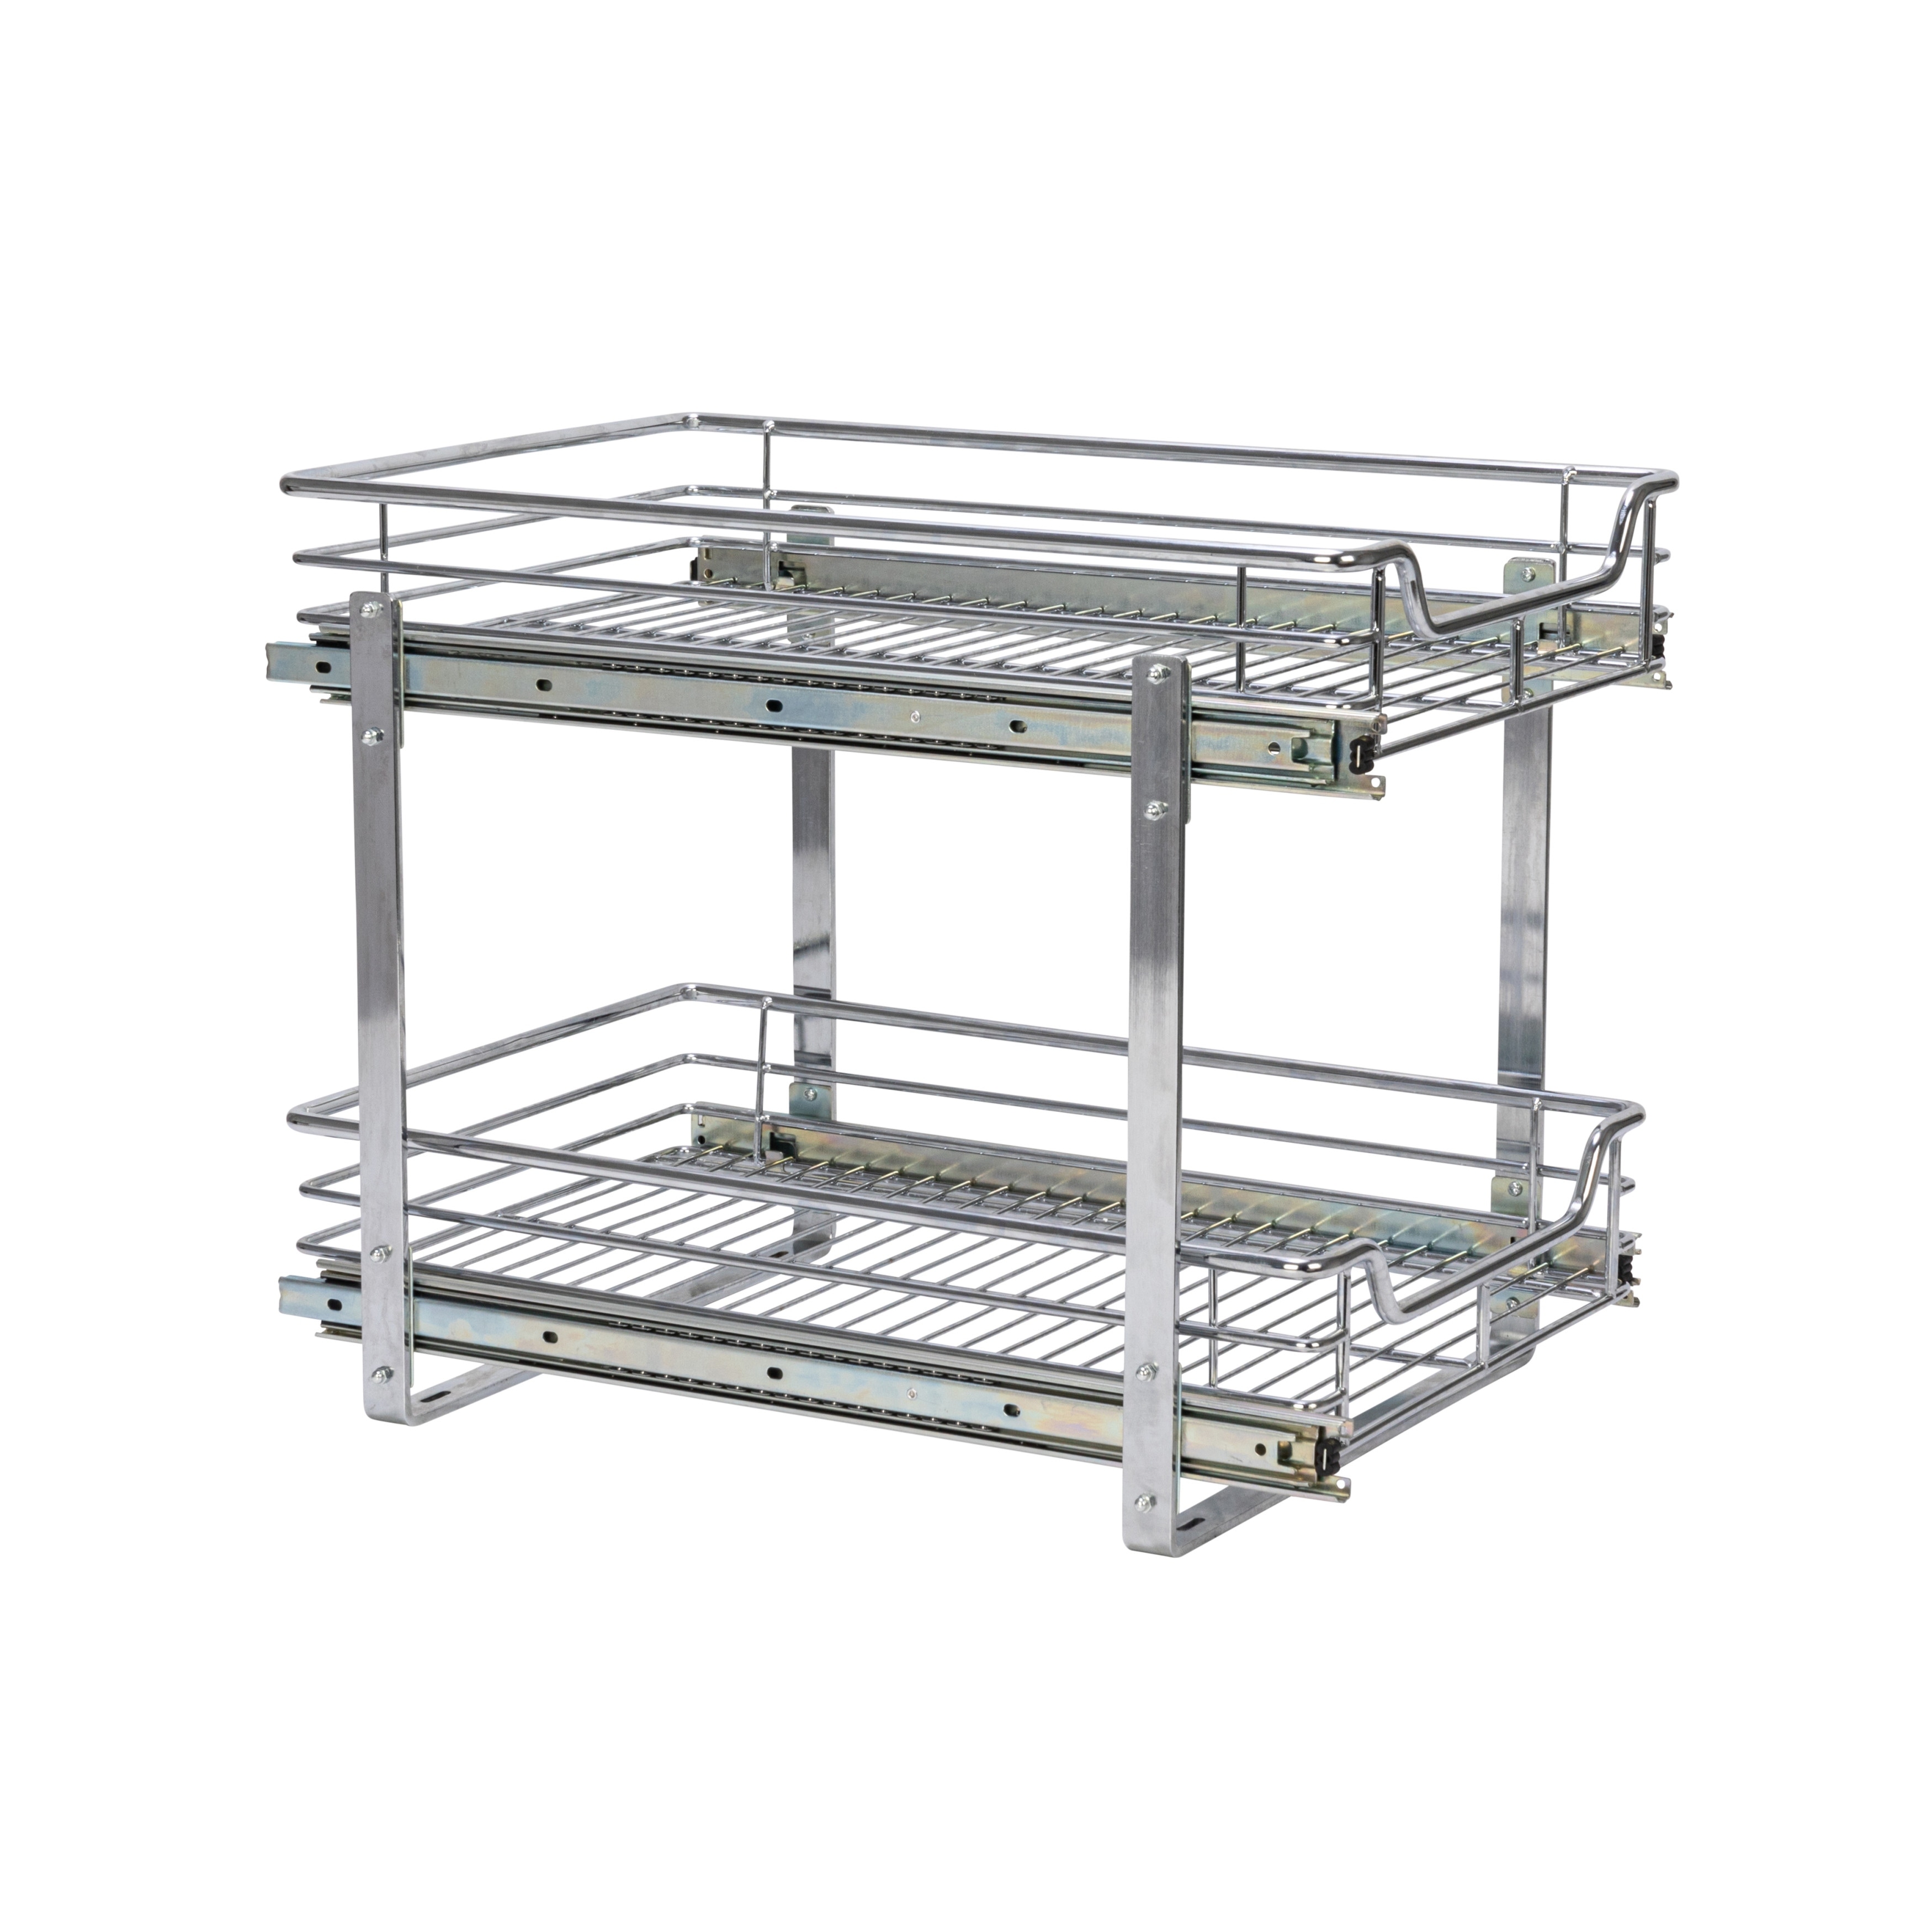 https://ak1.ostkcdn.com/images/products/is/images/direct/537129061c3780a2f1a33a576207b14b7a8b436b/Glidez-Slide-Out-Storage-Organizer---2-Tier-Design.jpg